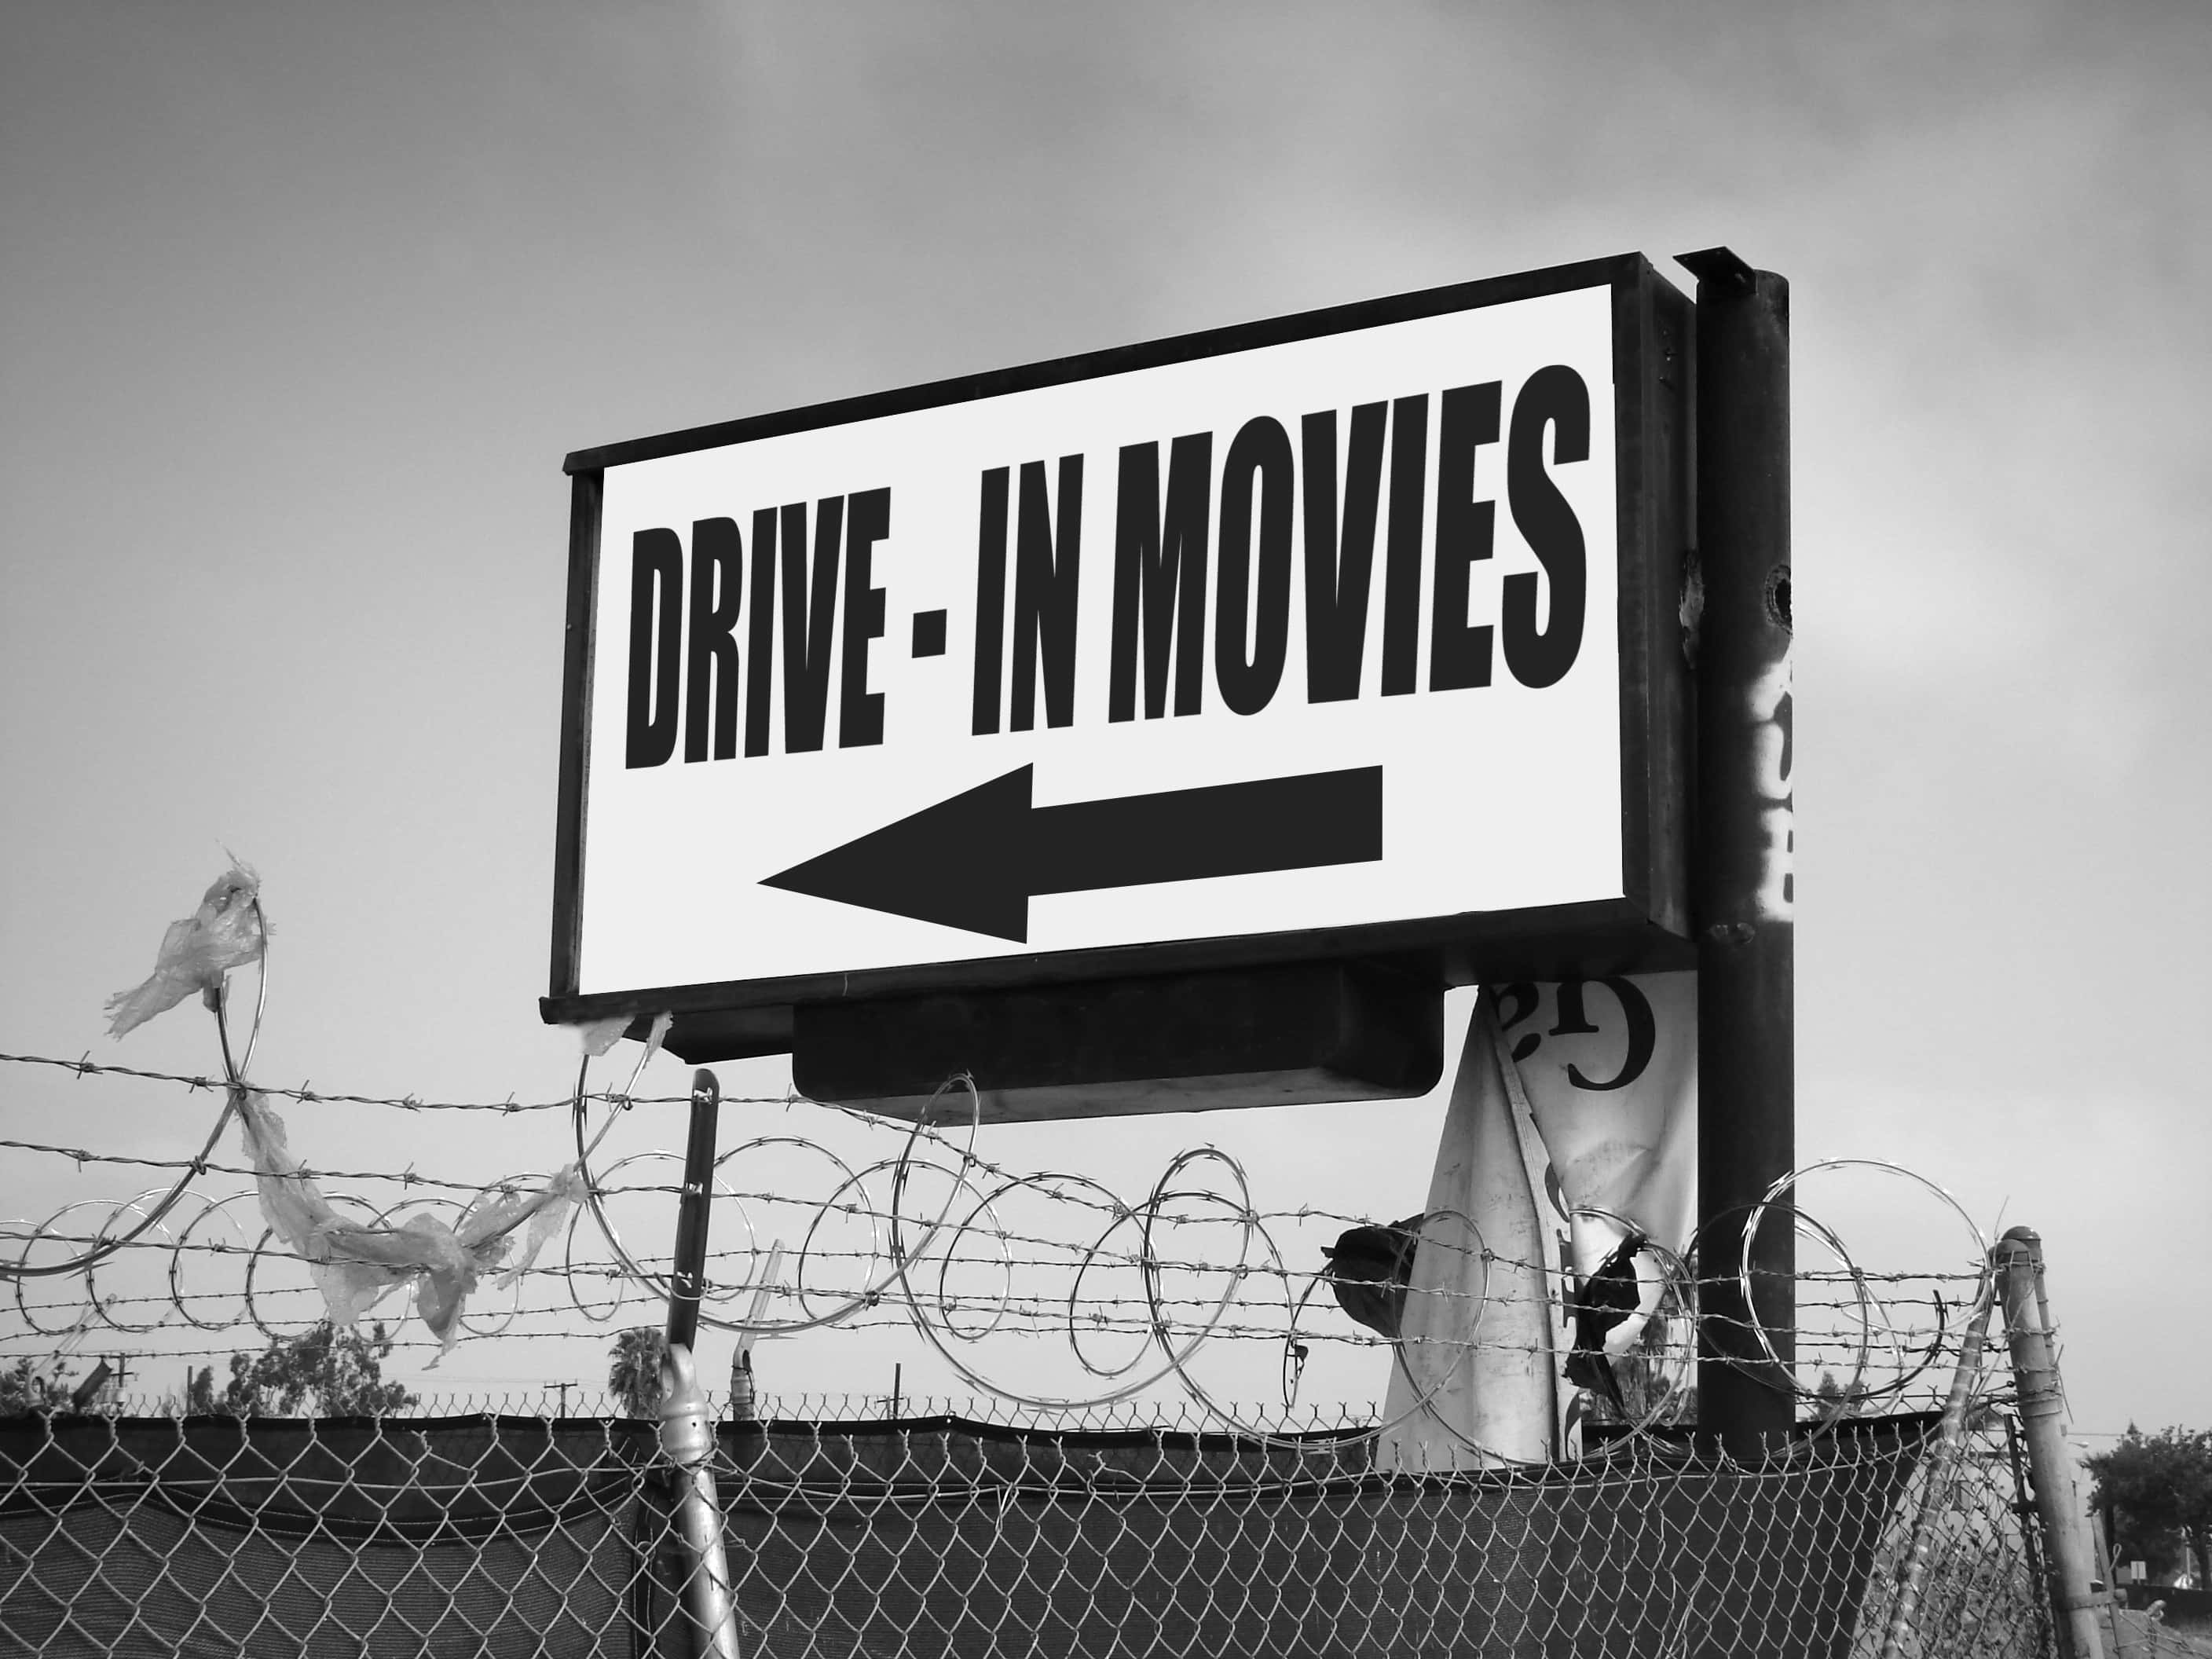 drive-in movies sign